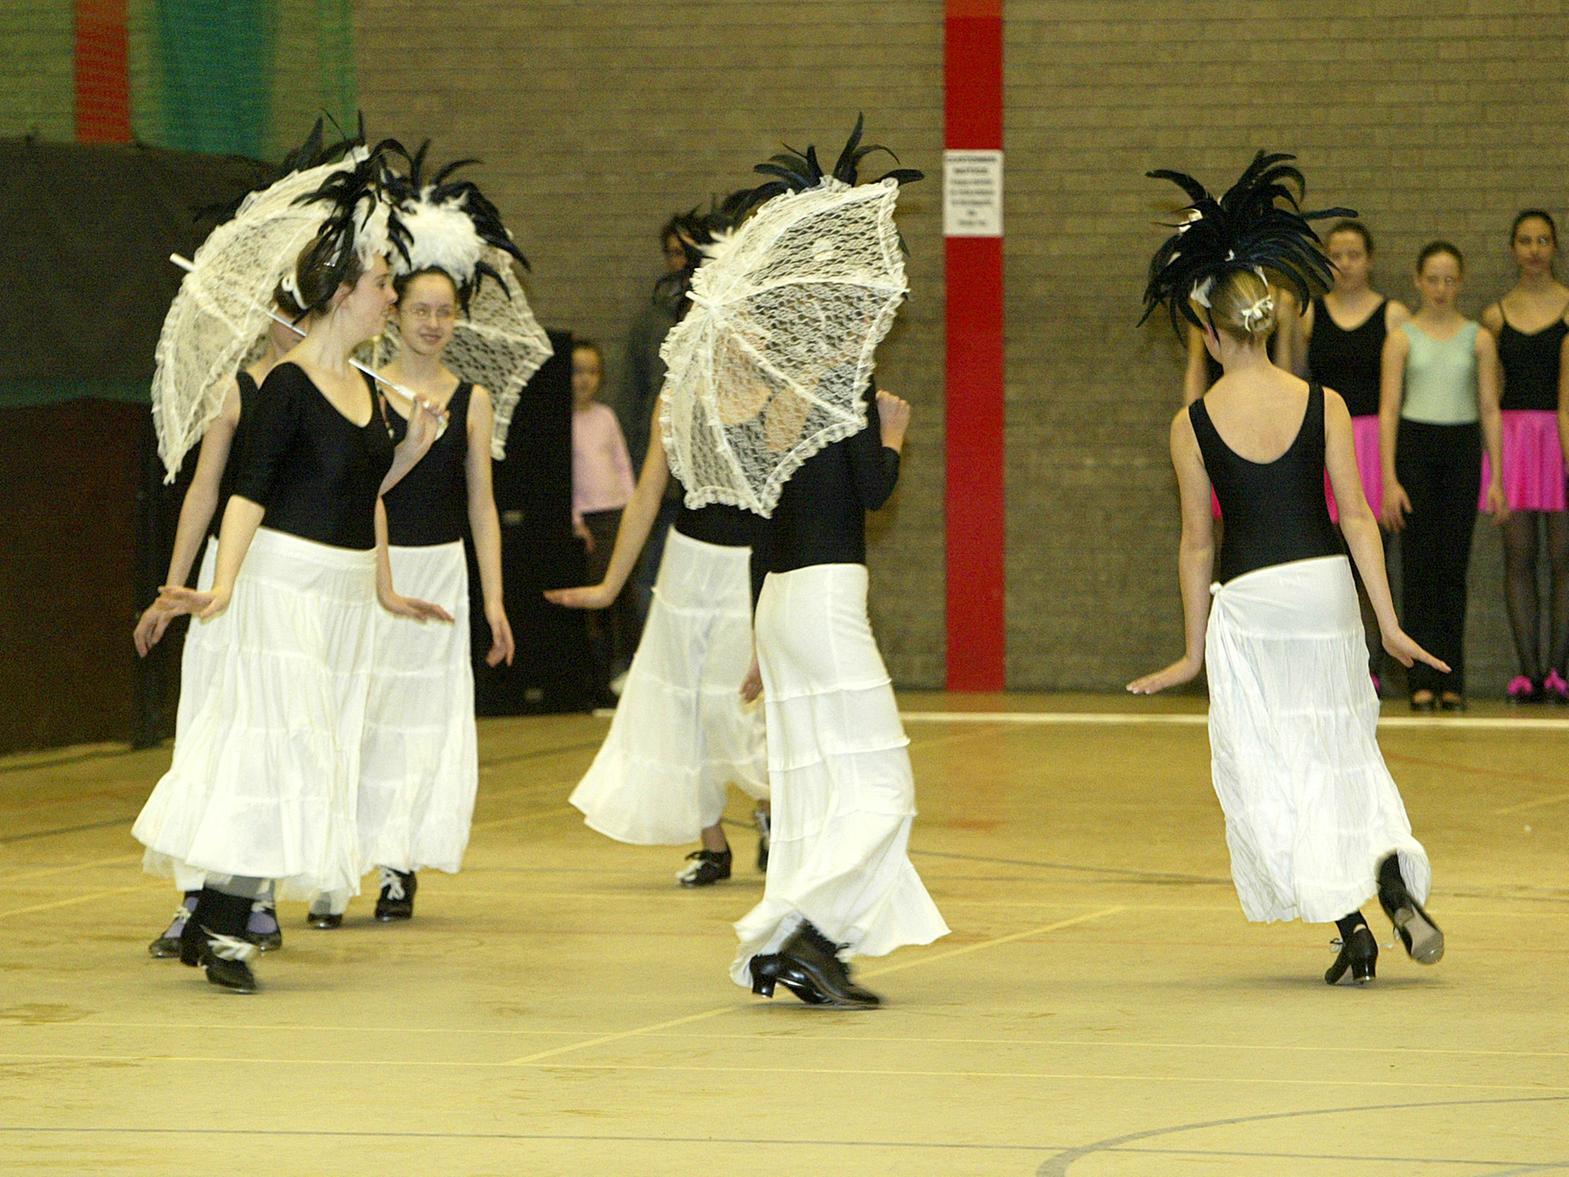 Performance from the Barbara Peters School of Dance from Huddersfield.